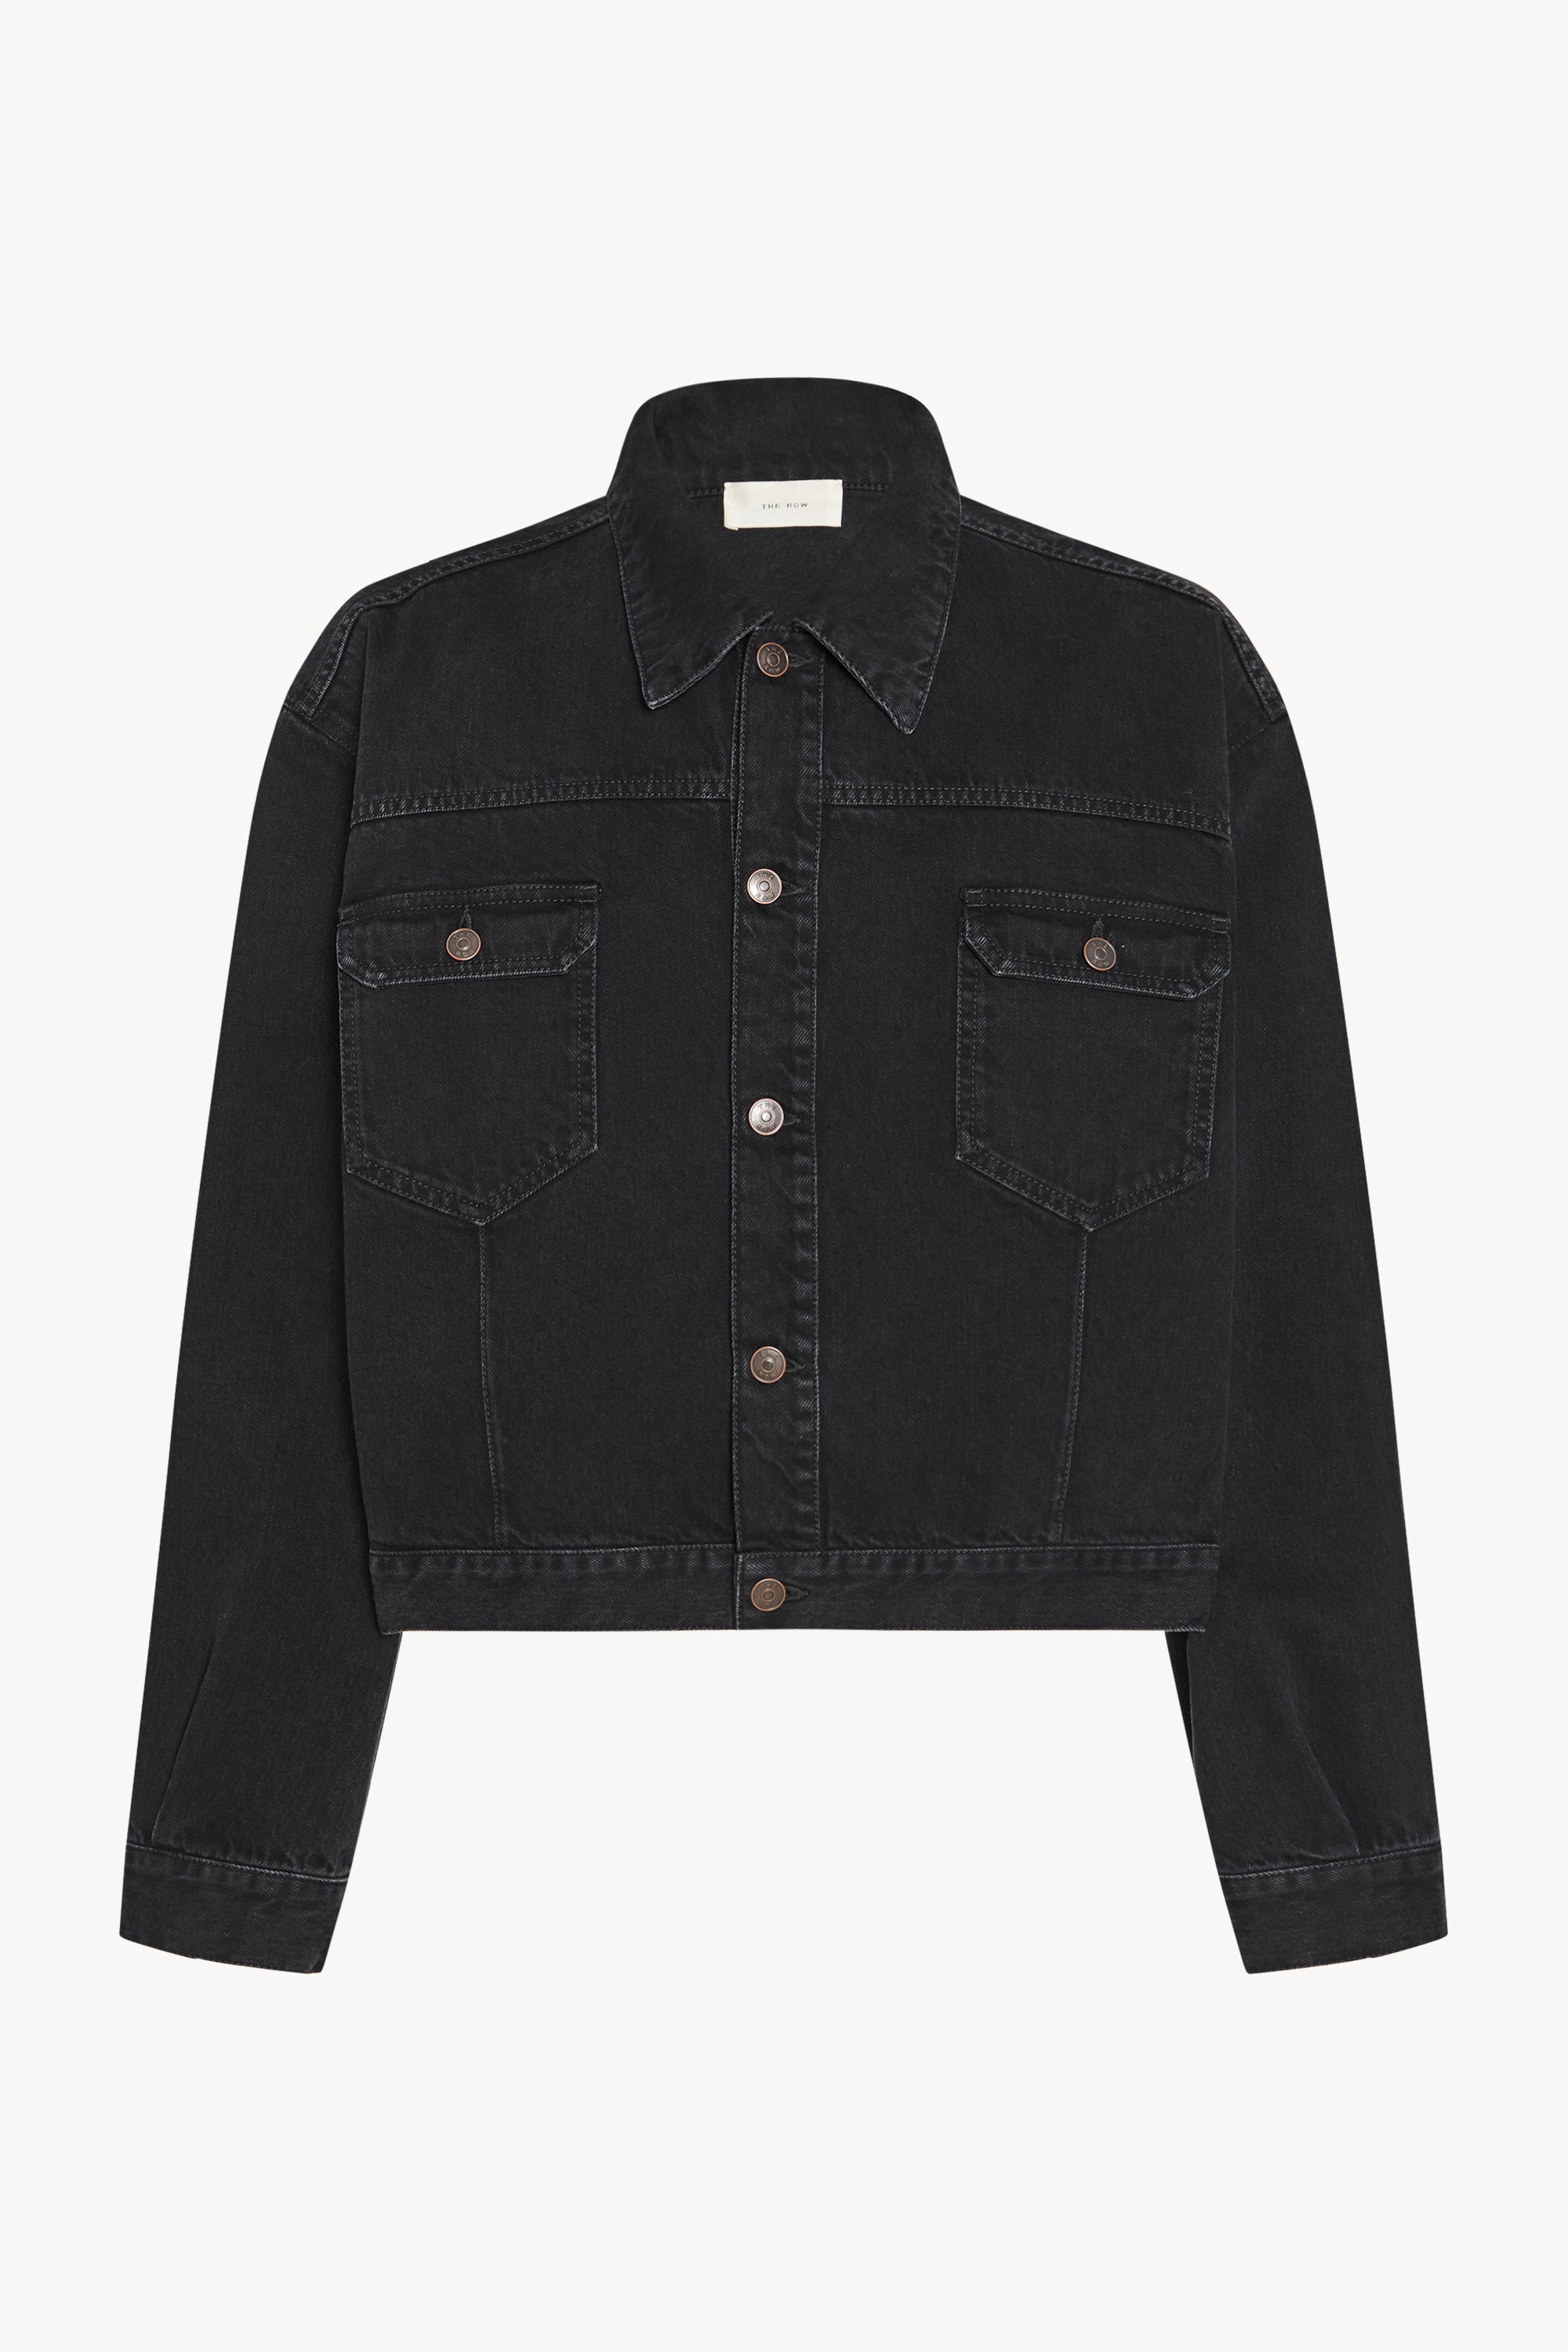 Orson Jacket Black in Cotton – The Row